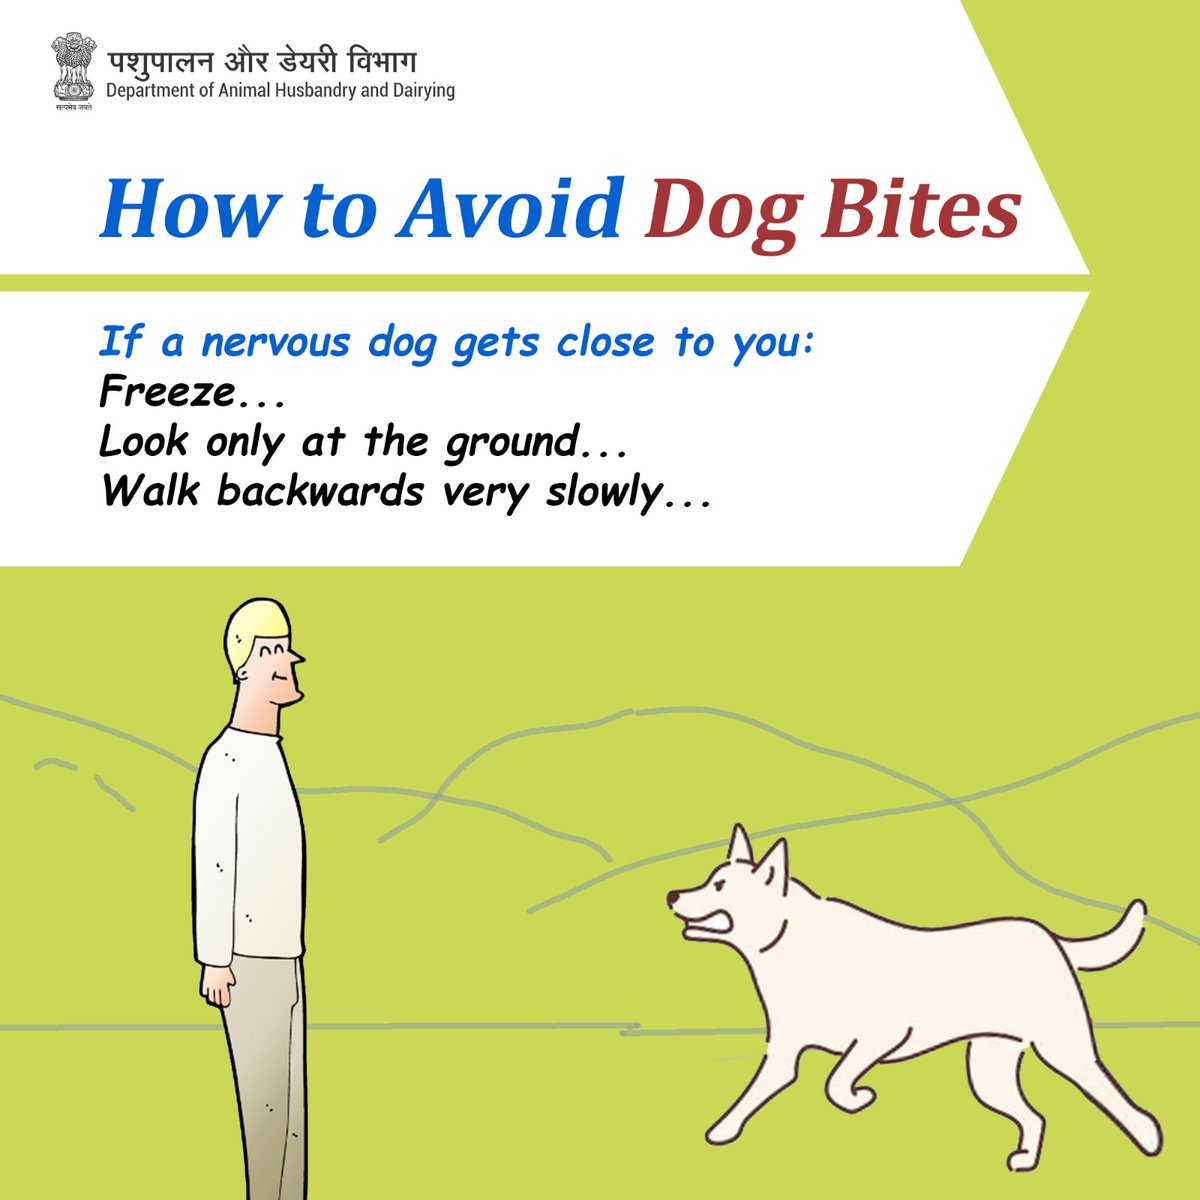 Stay still, eyes down, and slowly step back to avoid dog bites. #DogSafety #avoiddogbites #PreventRabies #VaccinateNow